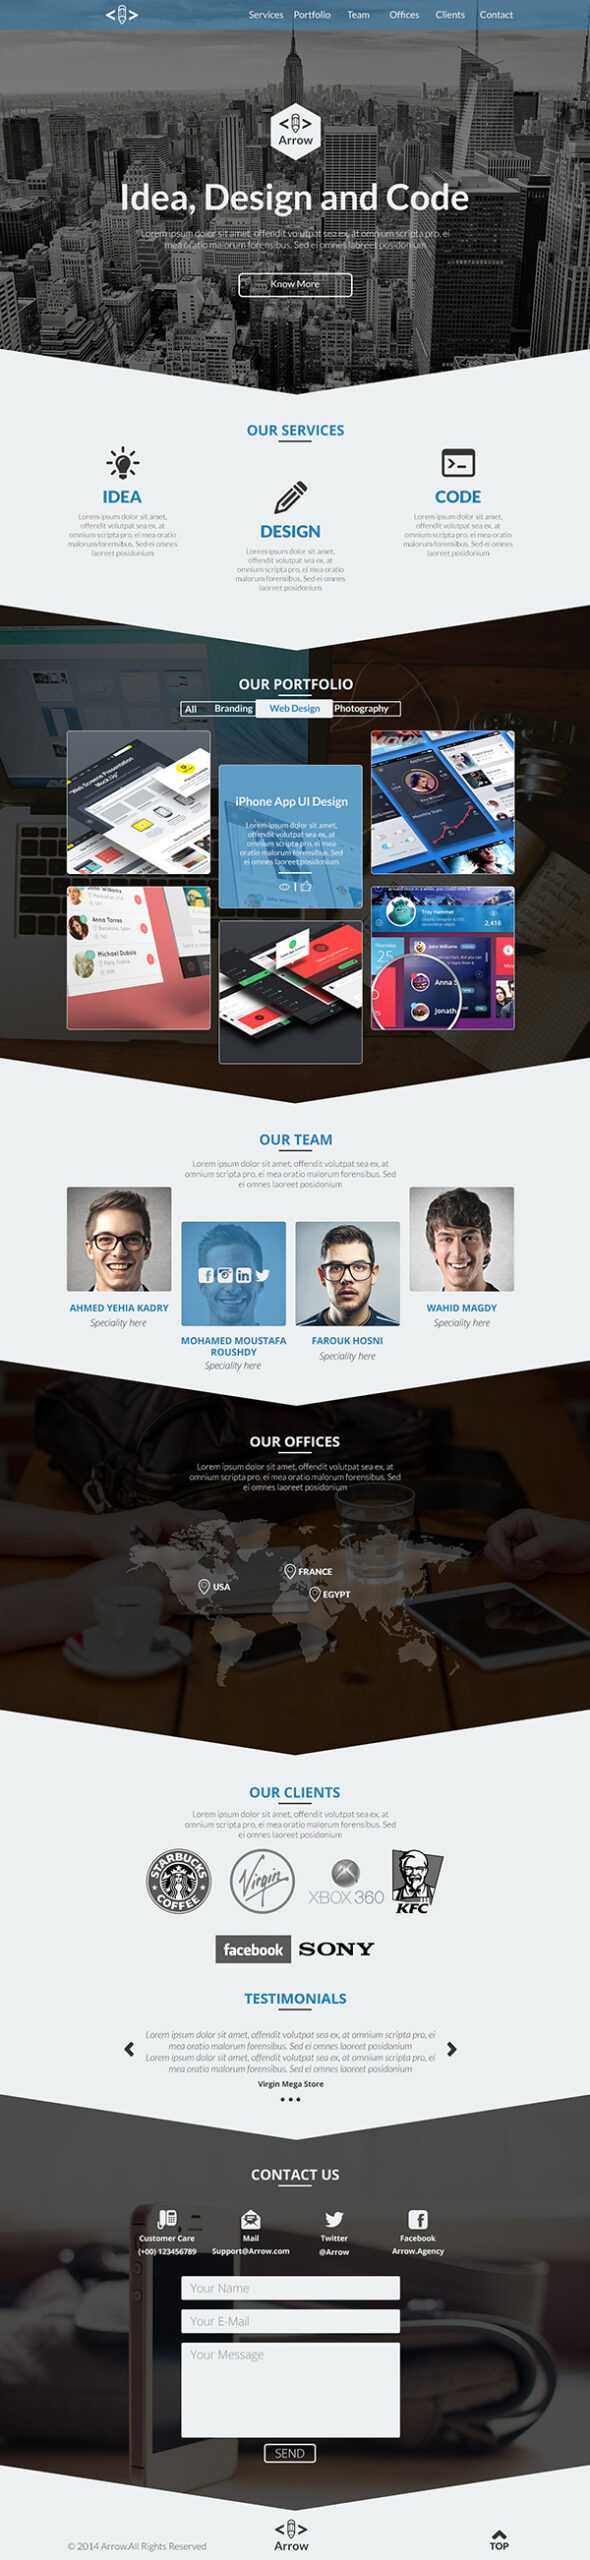 Psd Templates: 20 One Page Free Web Templates | Freebies Intended For Single Page Brochure Templates Psd